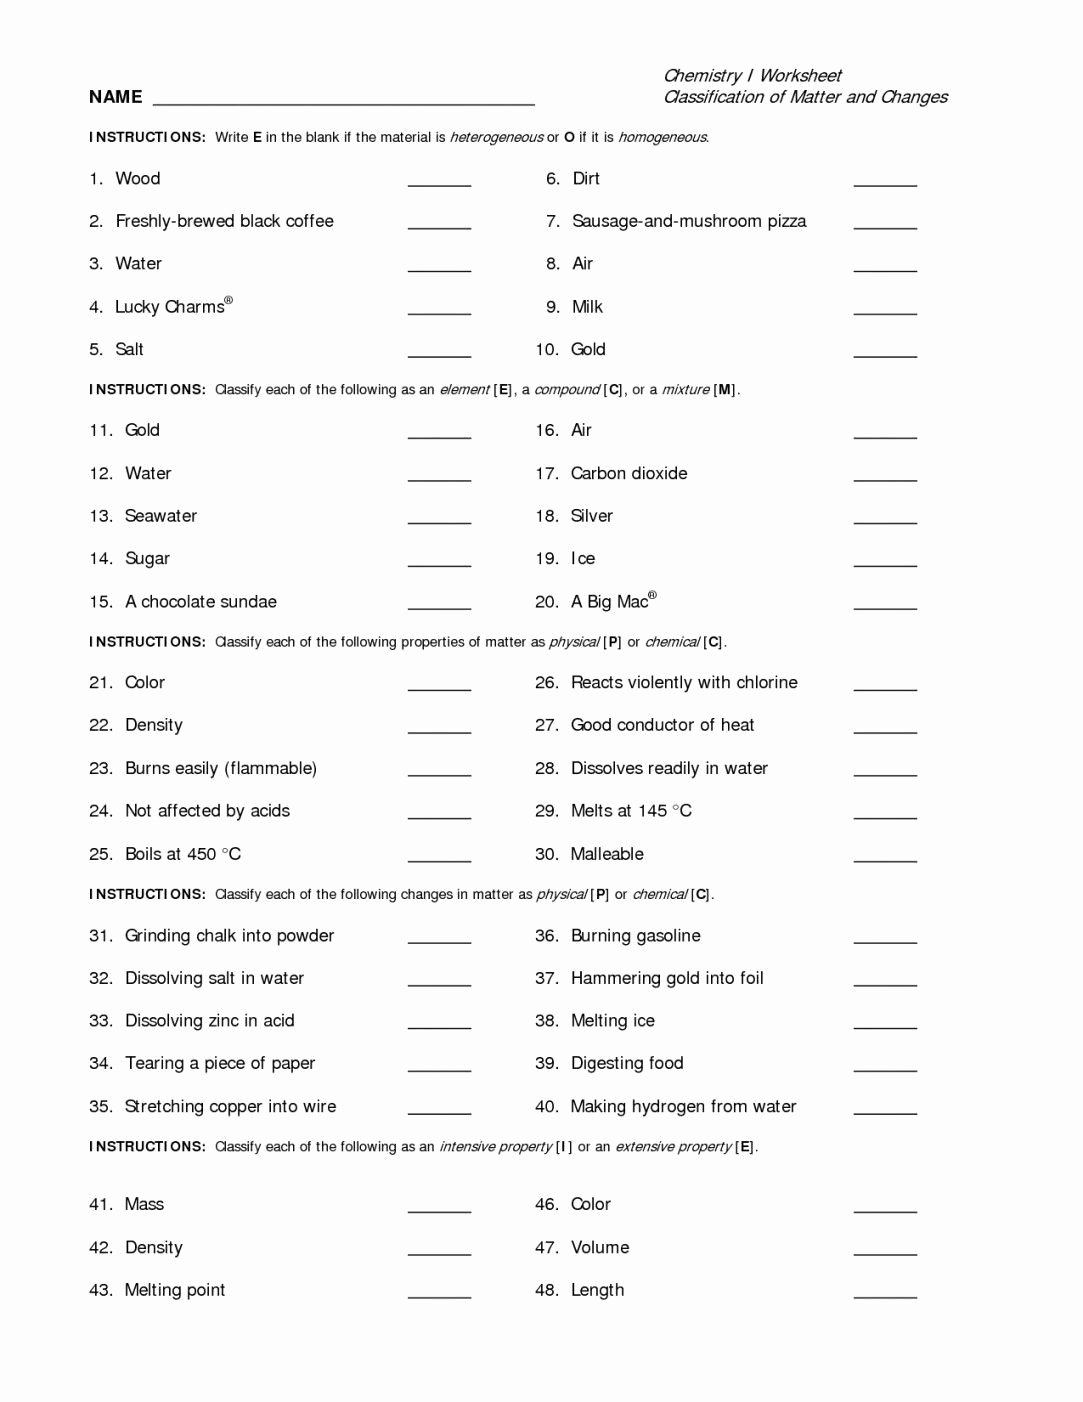 Composition Of Matter Worksheet Answers Fresh Section 1 Position Matter Worksheet Answers